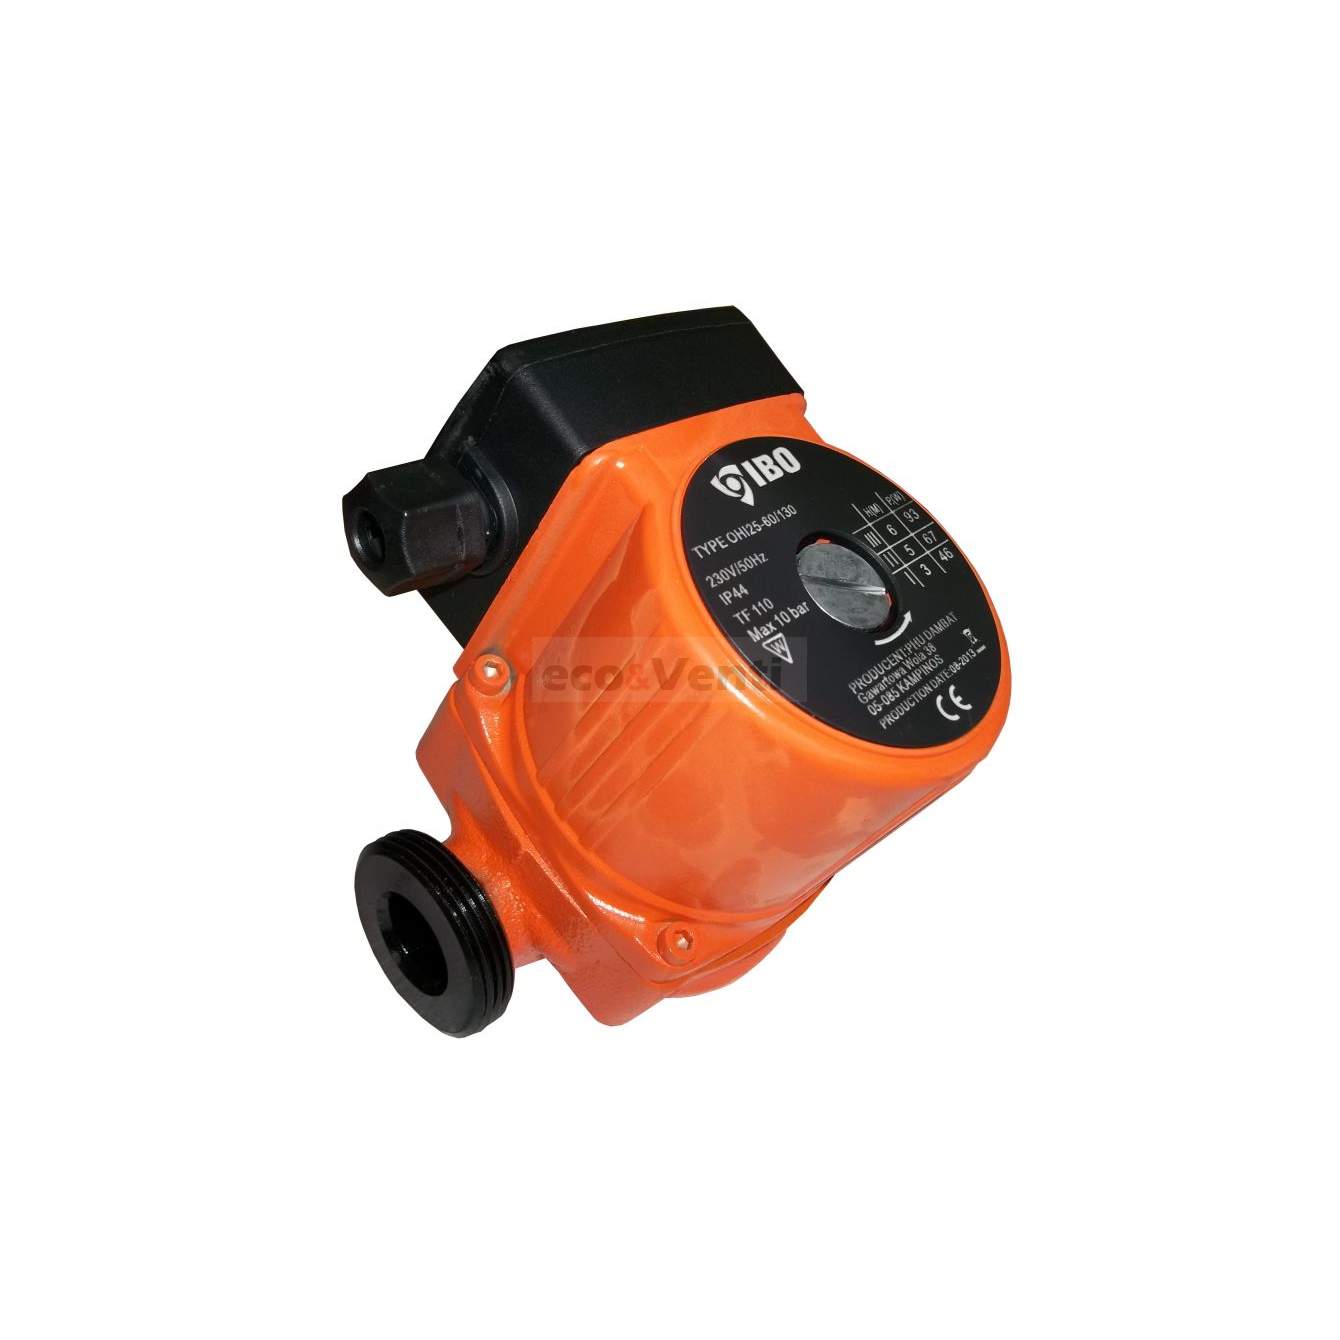 CENTRAL HEATING CIRCULATING PUMP FOR HOT WATER HEATING SYSTEM 25-60 130 